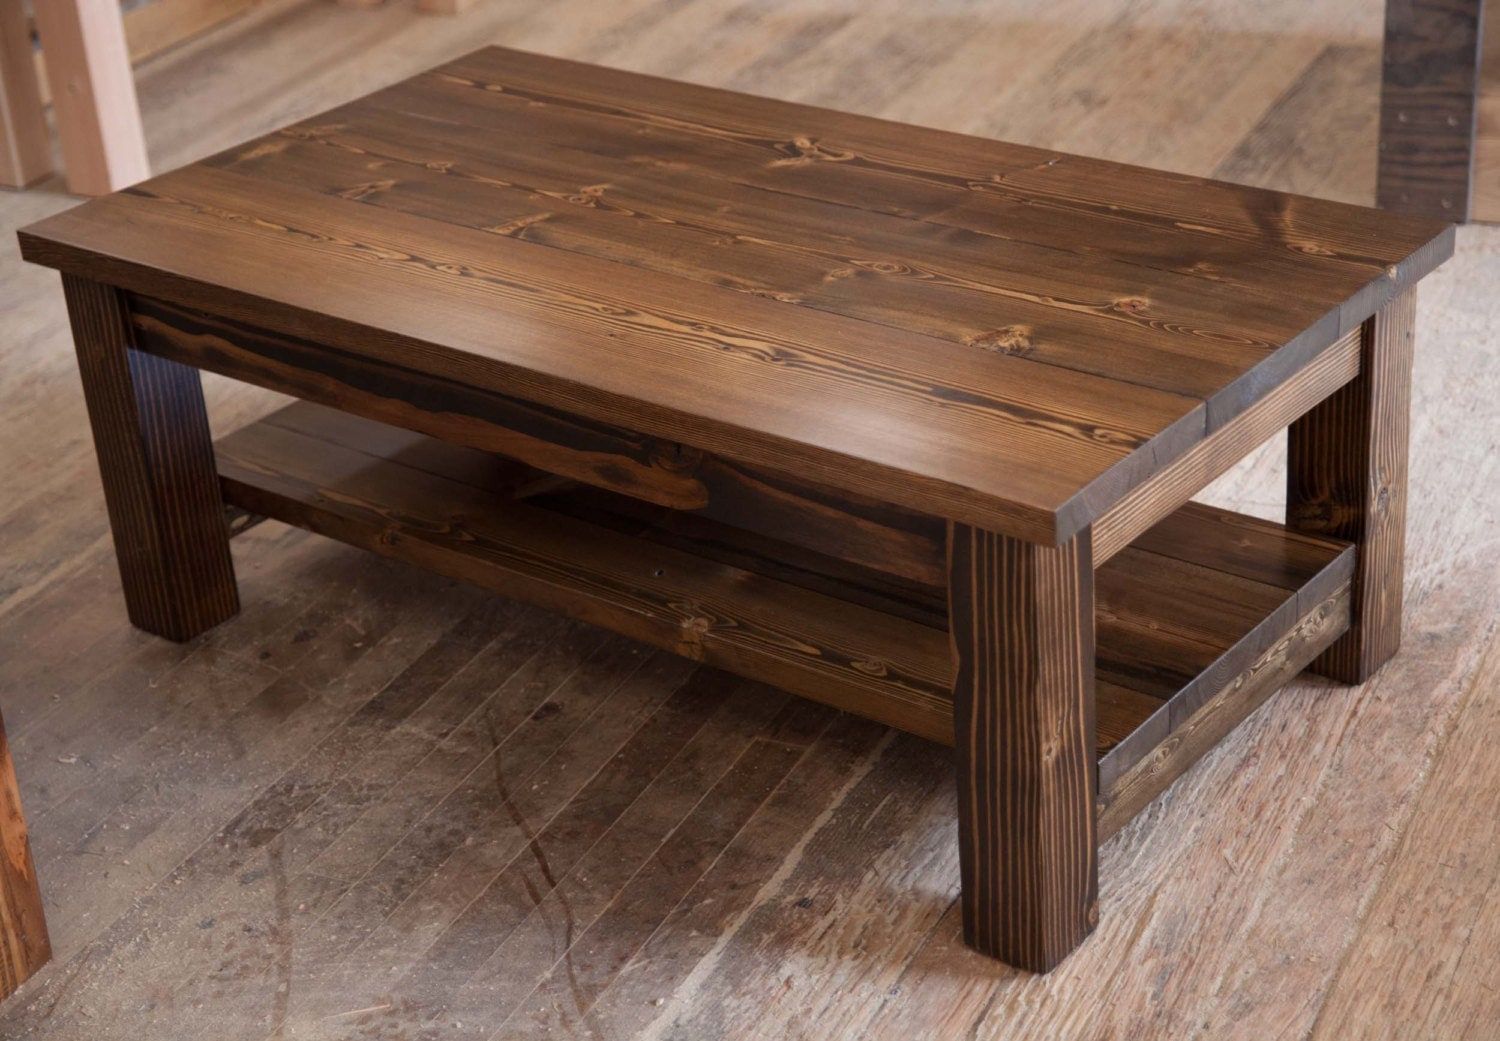 Farmhouse Coffee Table Rustic Coffee Table Solid Wood Intended For Rustic Wood Coffee Tables (Gallery 14 of 21)